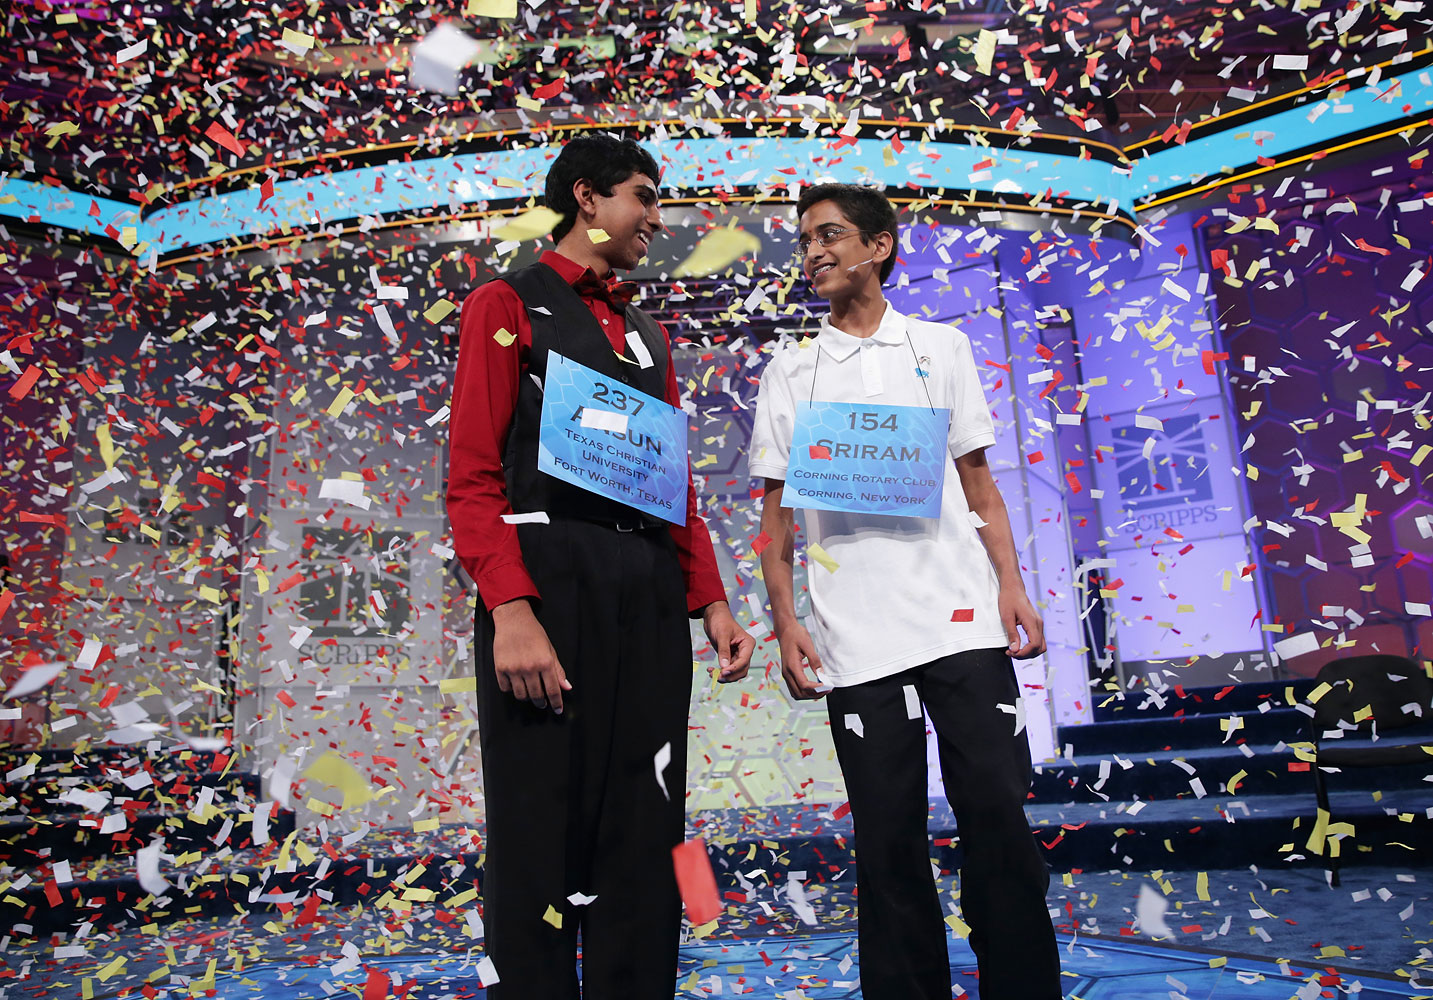 NATIONAL HARBOR, MD - MAY 29:  Confetti falls after Sriram Hathwar, right, of Painted Post, New York and Ansun Sujoe, left, of Fort Worth, Texas both won the 2014 Scripps National Spelling Bee competition May 29, 2014 in National Harbor, Maryland. (Alex Wong—Getty Images)